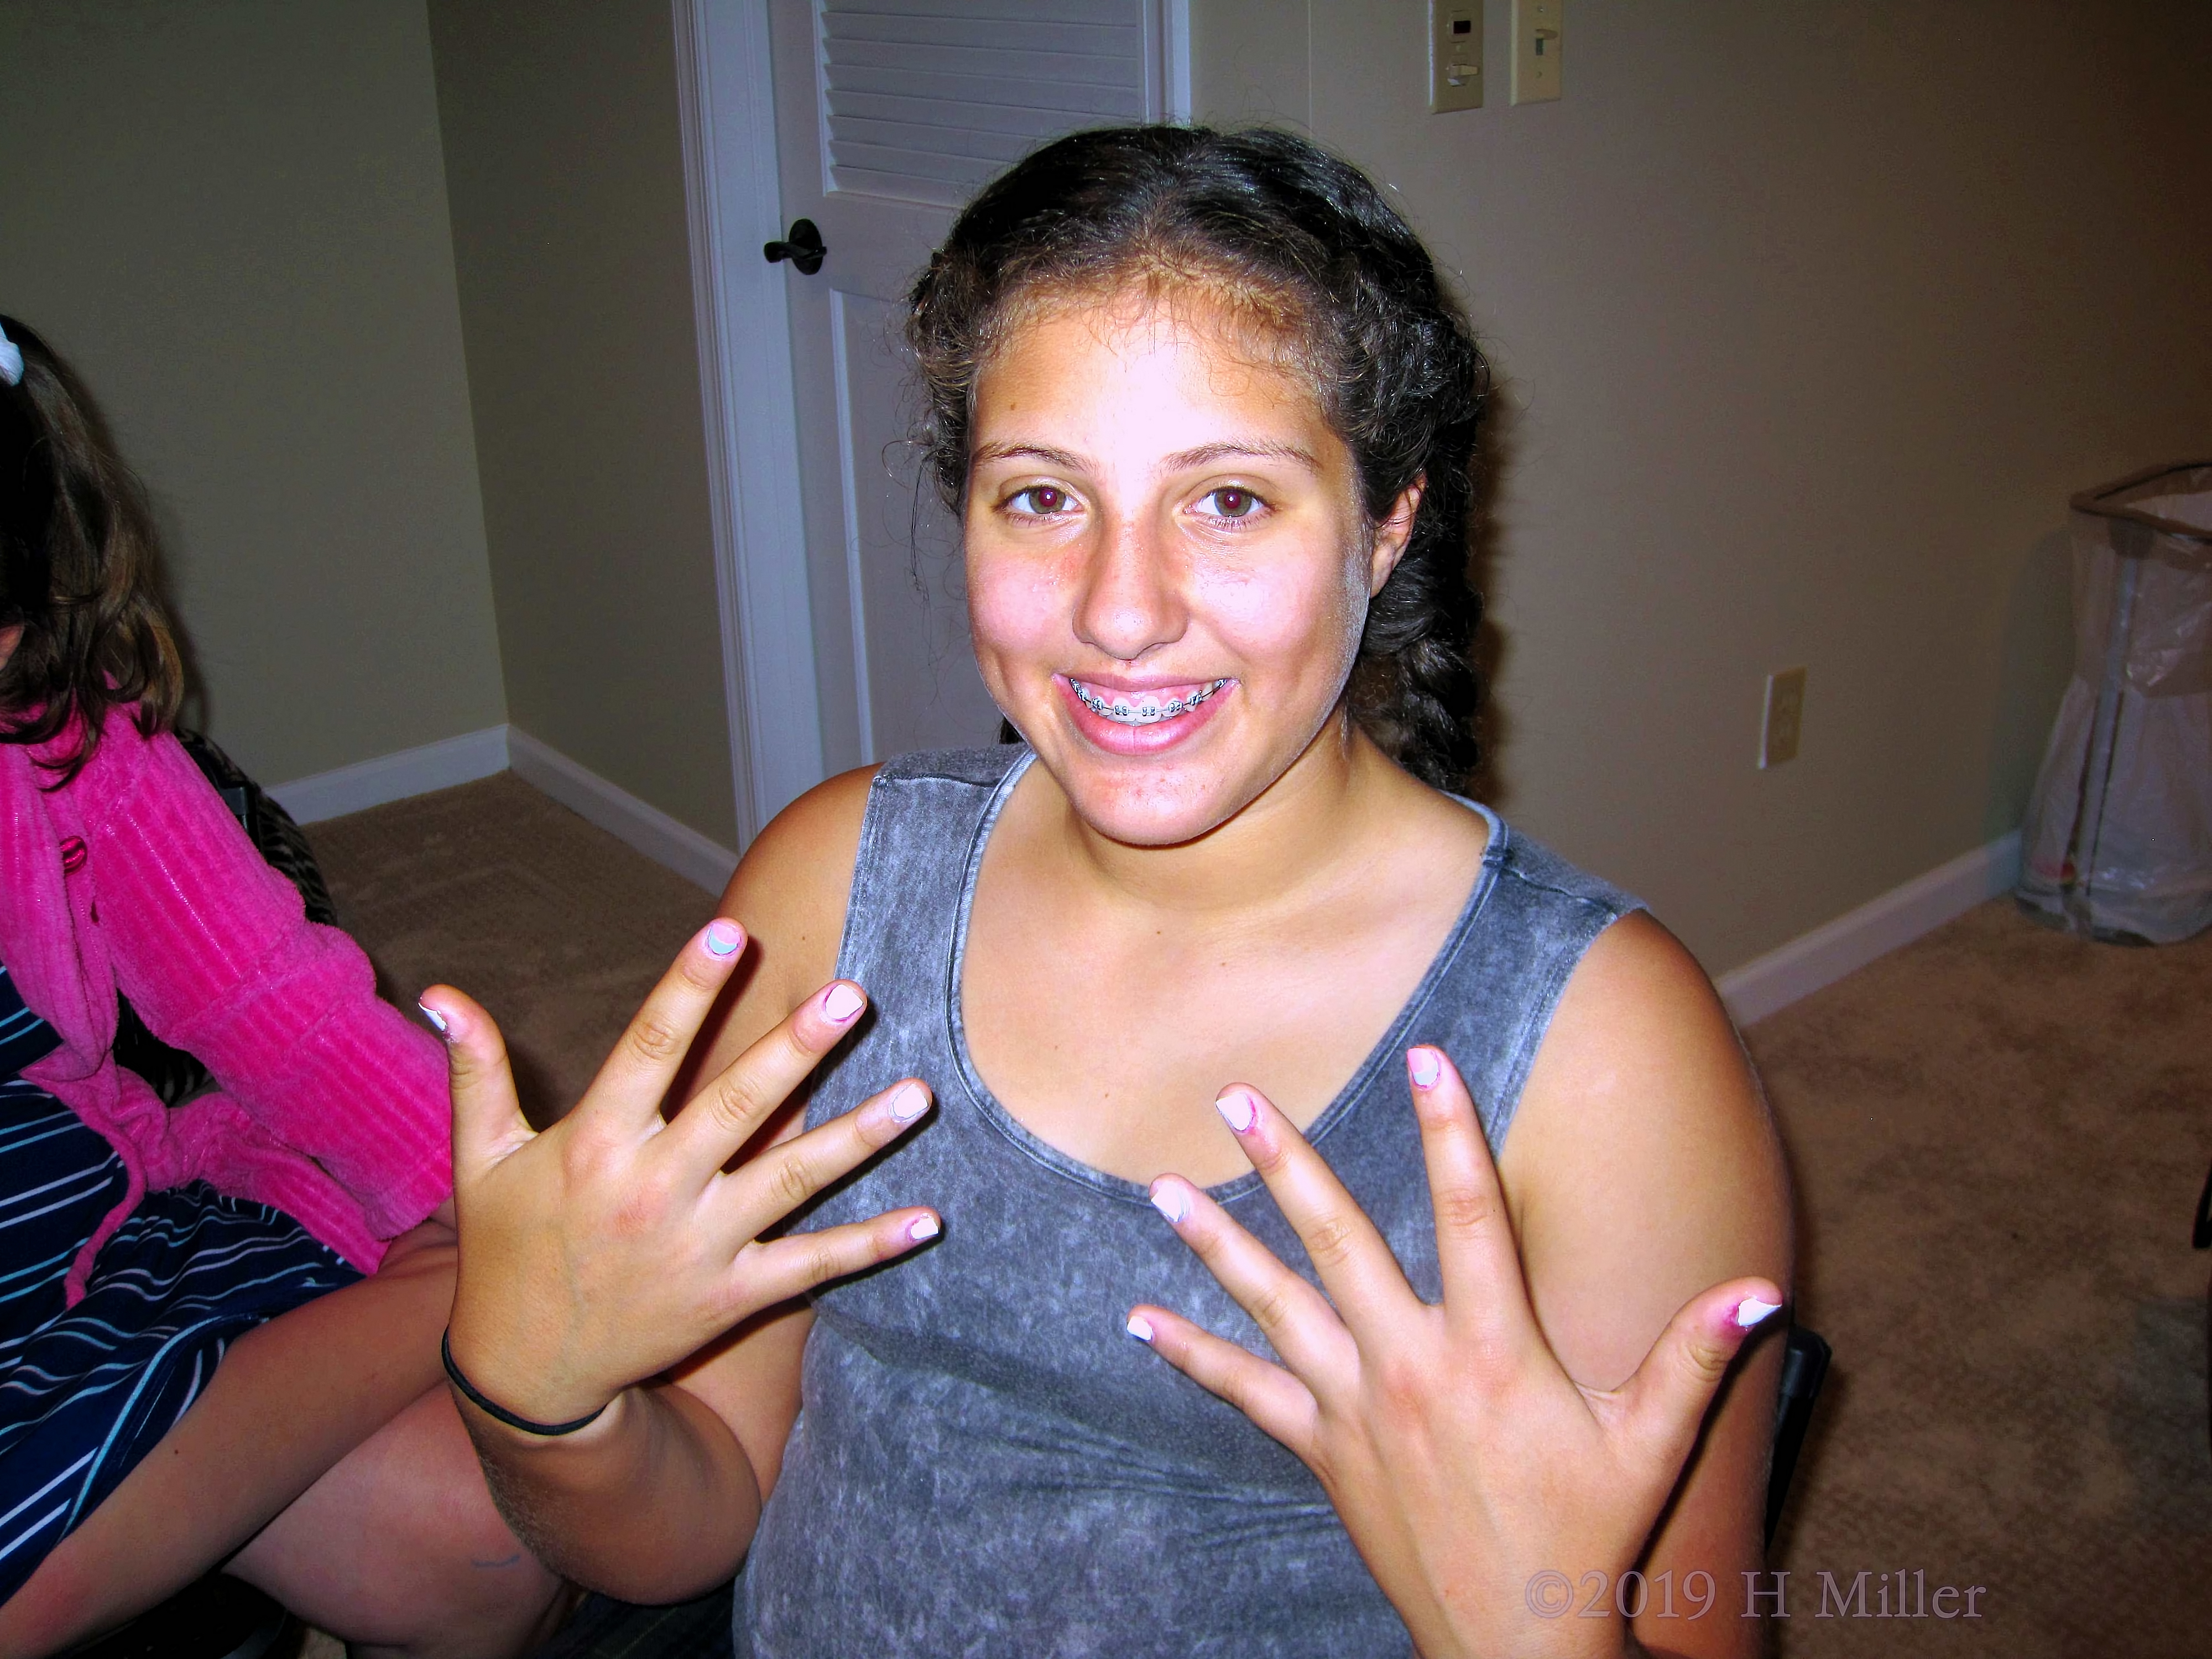 Guest Smiling And Showing Off Pretty White Girls Manicure.